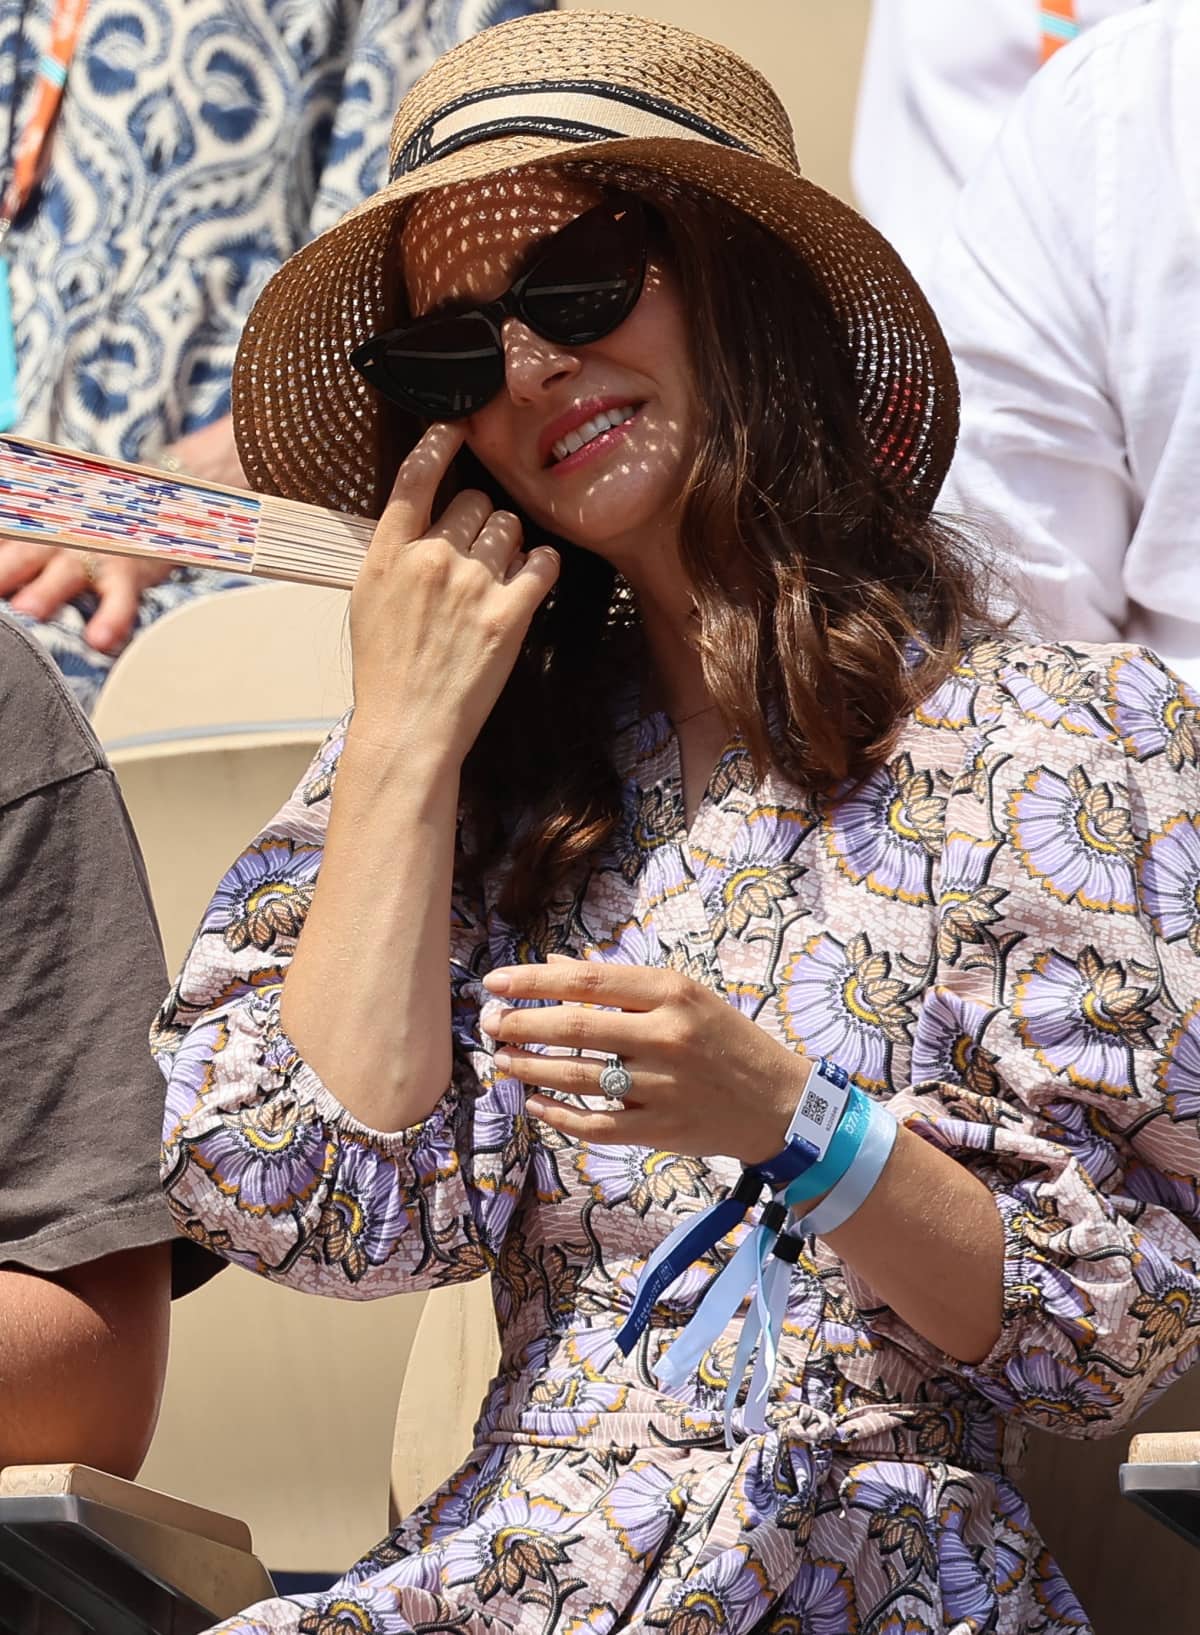 Natalie Portman wearing a Dior wide-brim hat and flashing both her engagement ring and wedding band